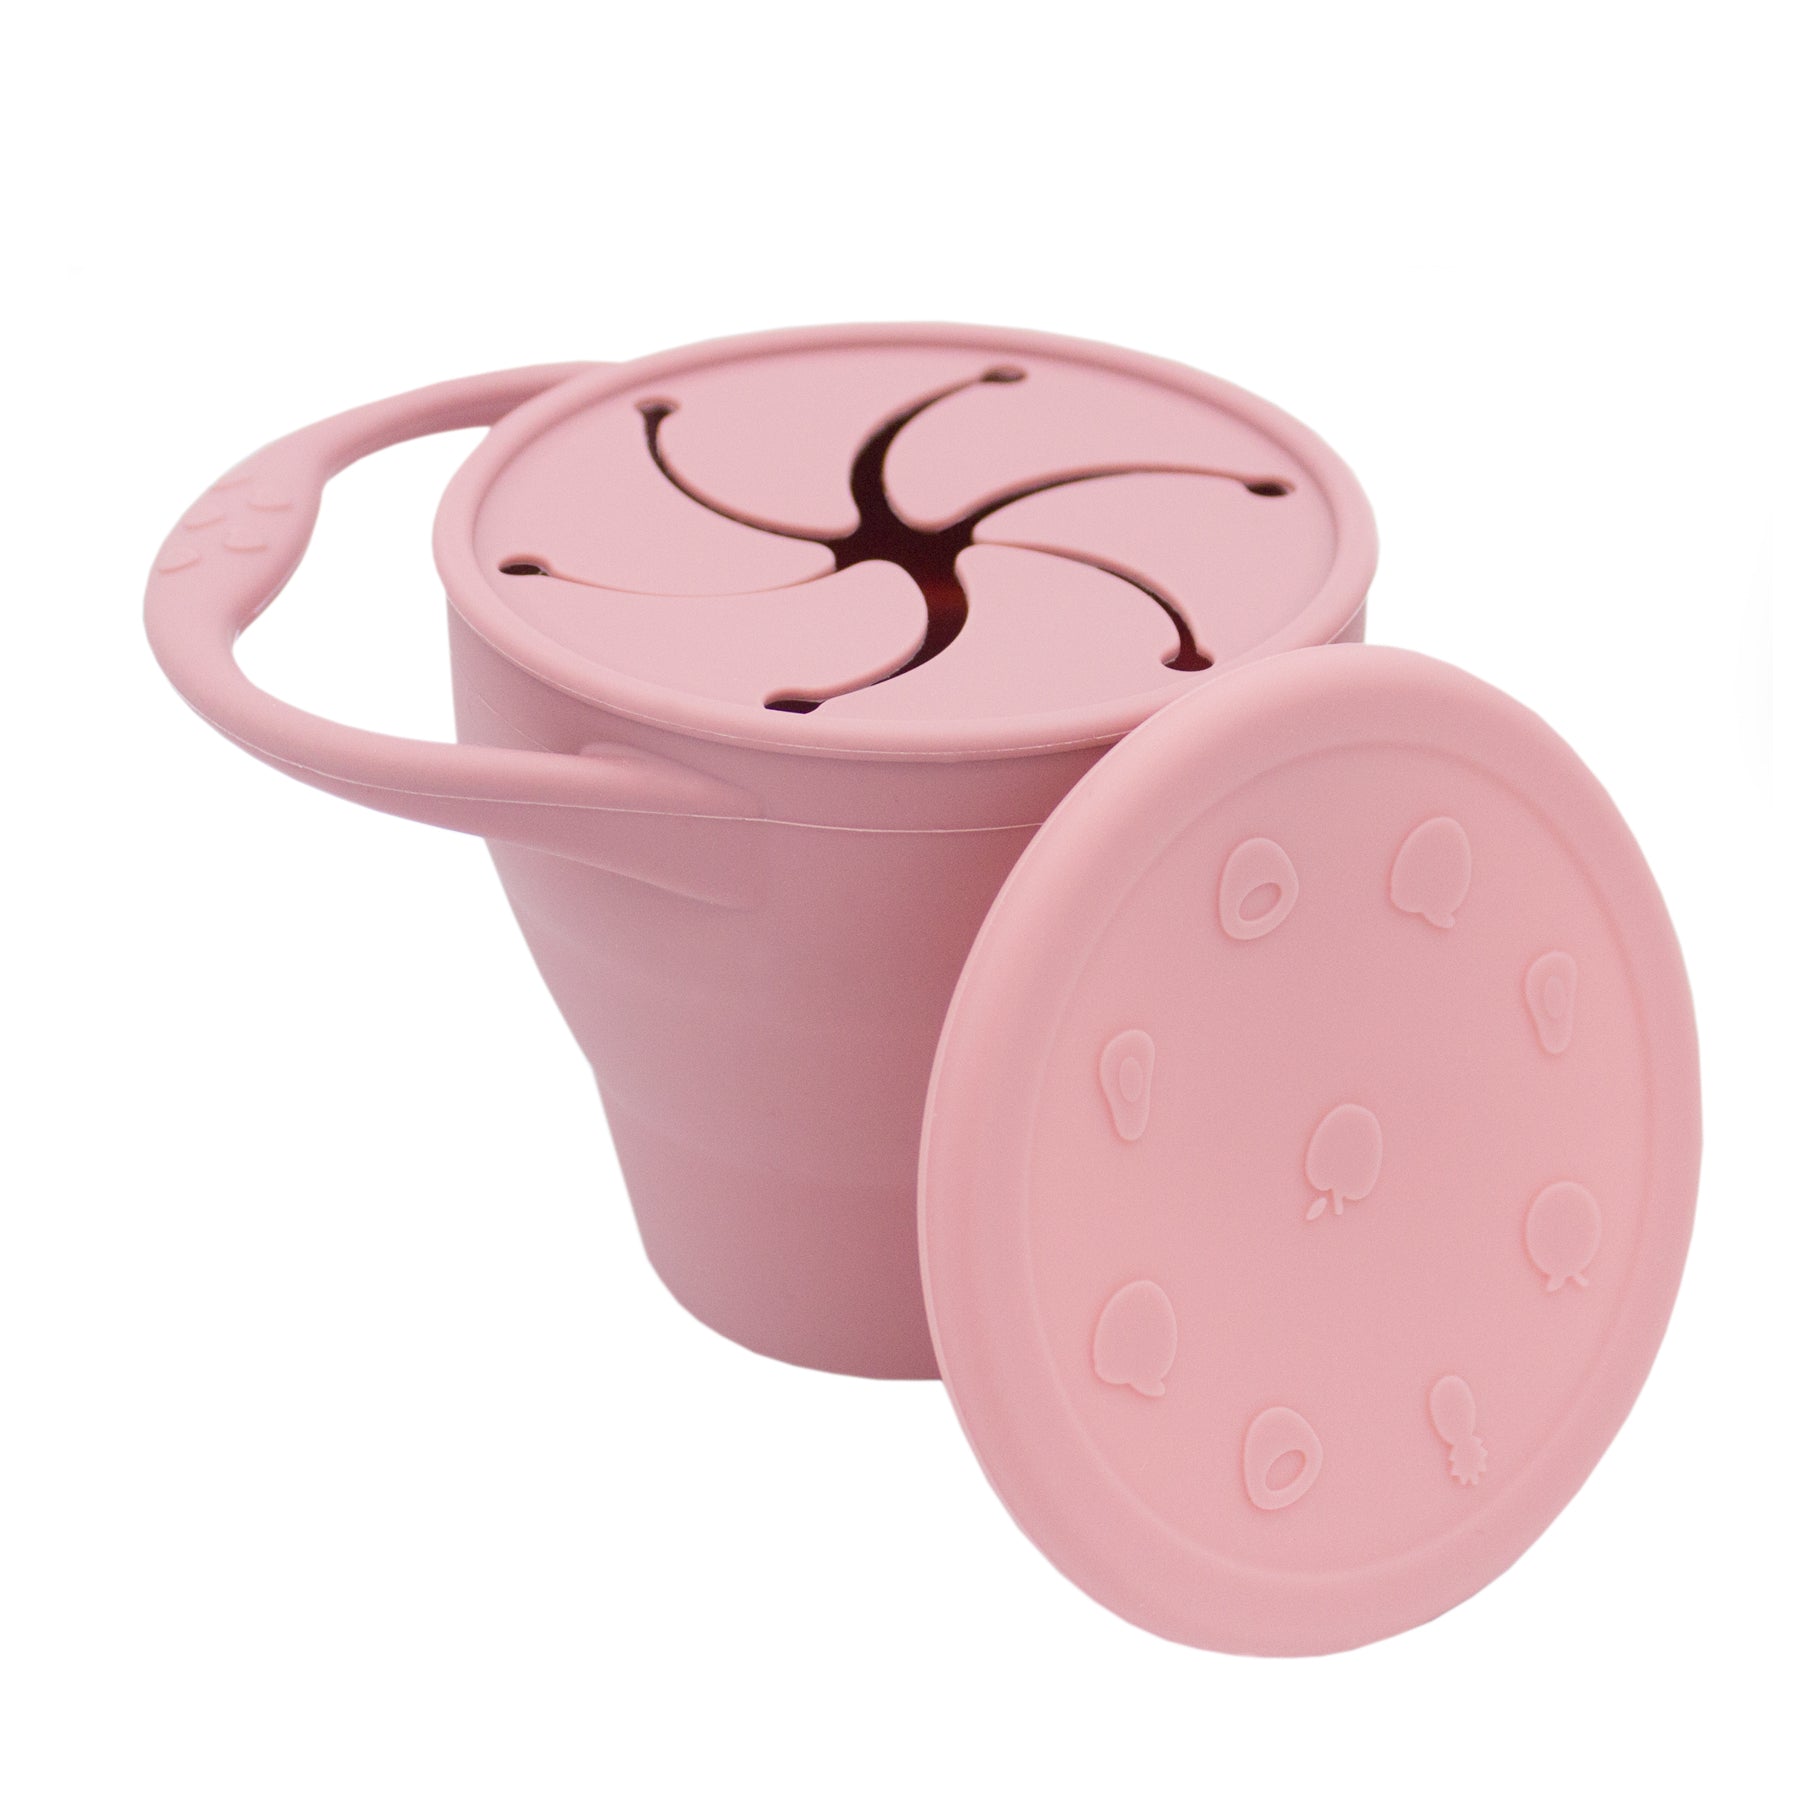 Collapsible Silicone Snack Cup Baby and Toddler by MKS Miminoo USA